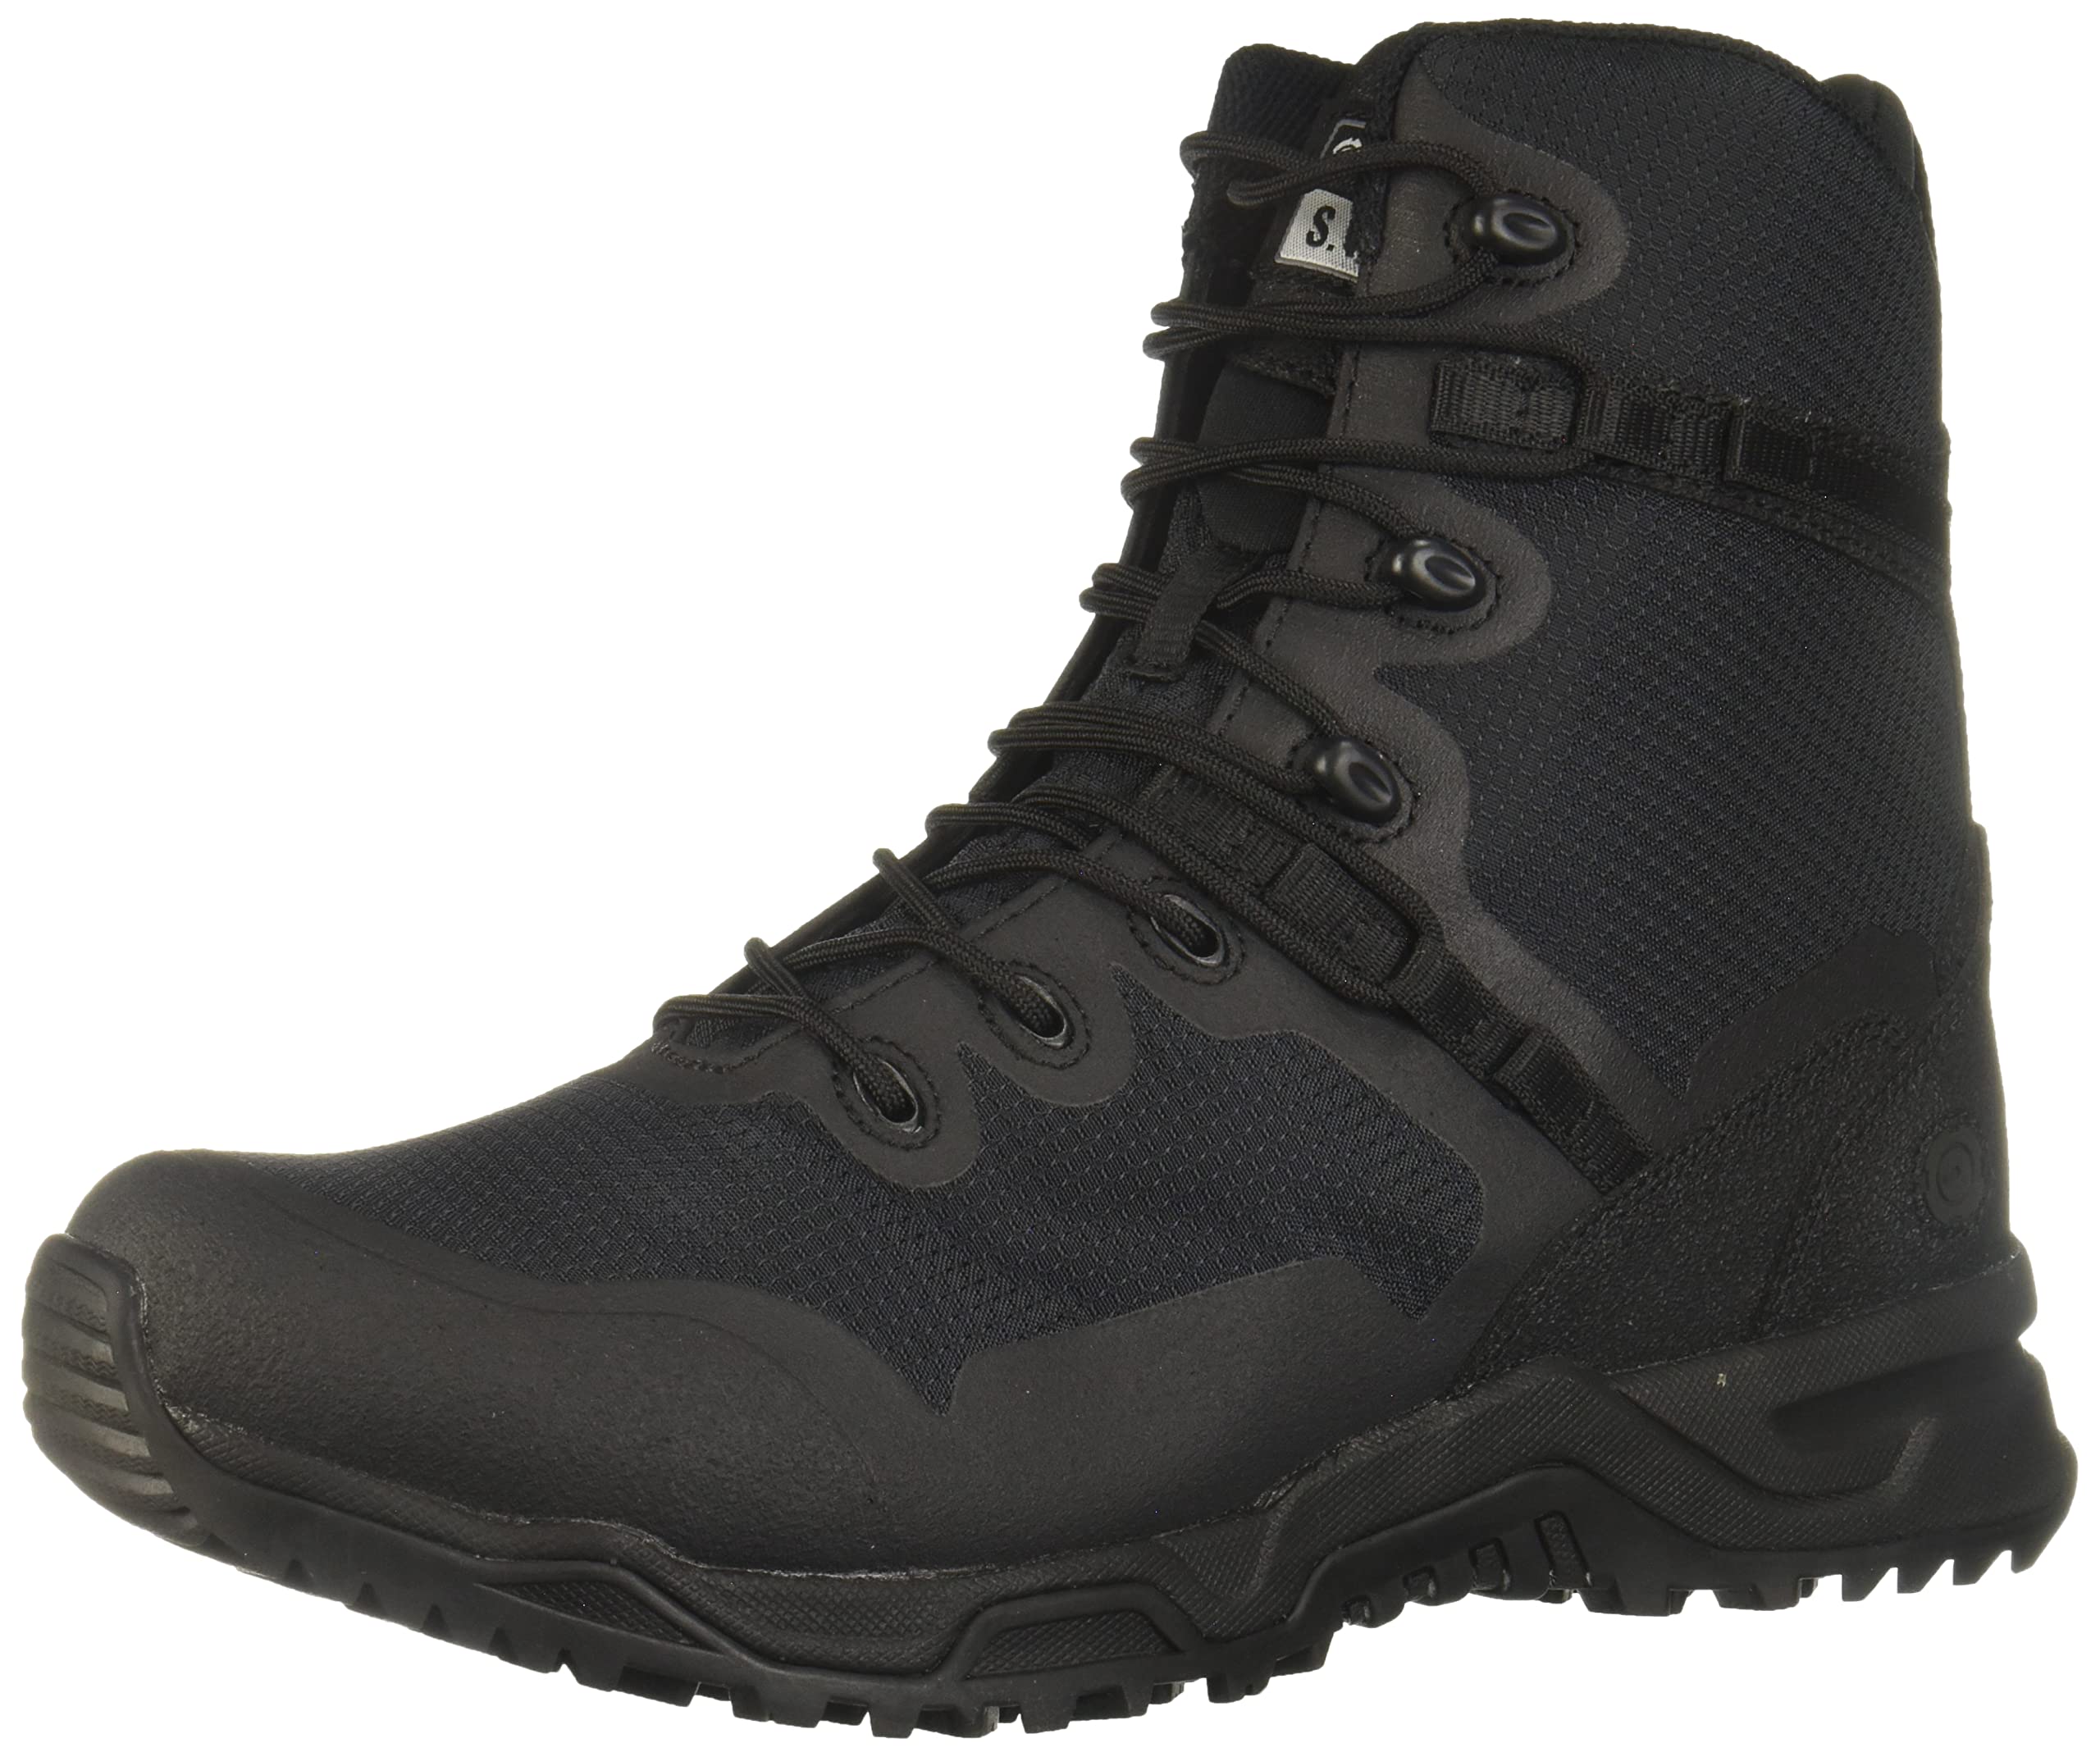 Original SWAT Alpha Fury 8" Side Zip Tactical Boot - High Performance Light Weight Duty Shoes - Airport Friendly - Black